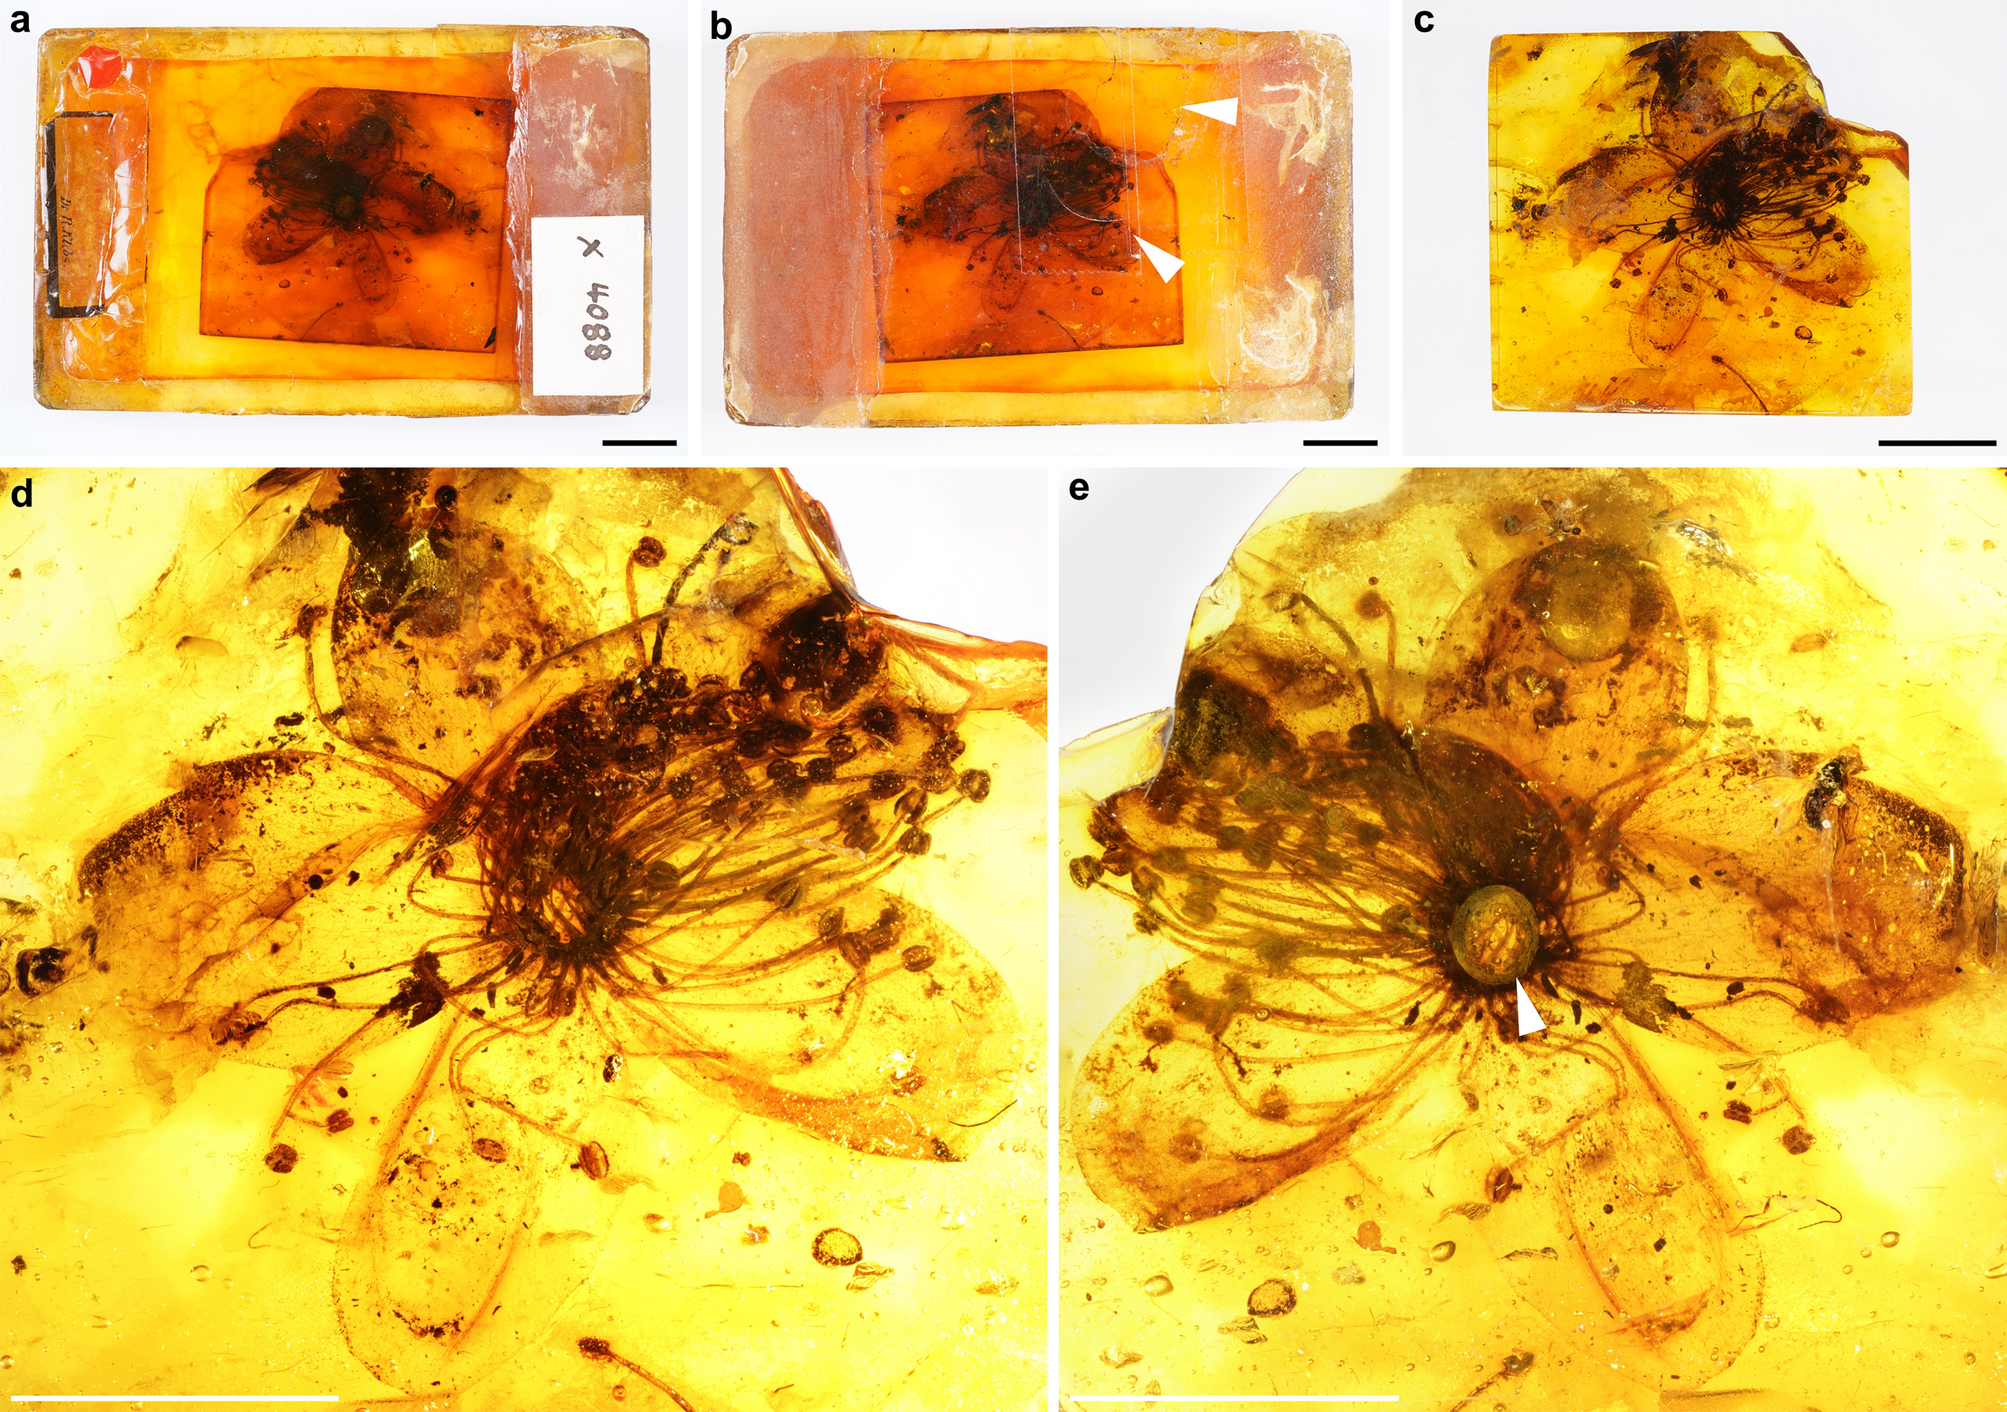 The largest amber-preserved flower revisited | Scientific Reports